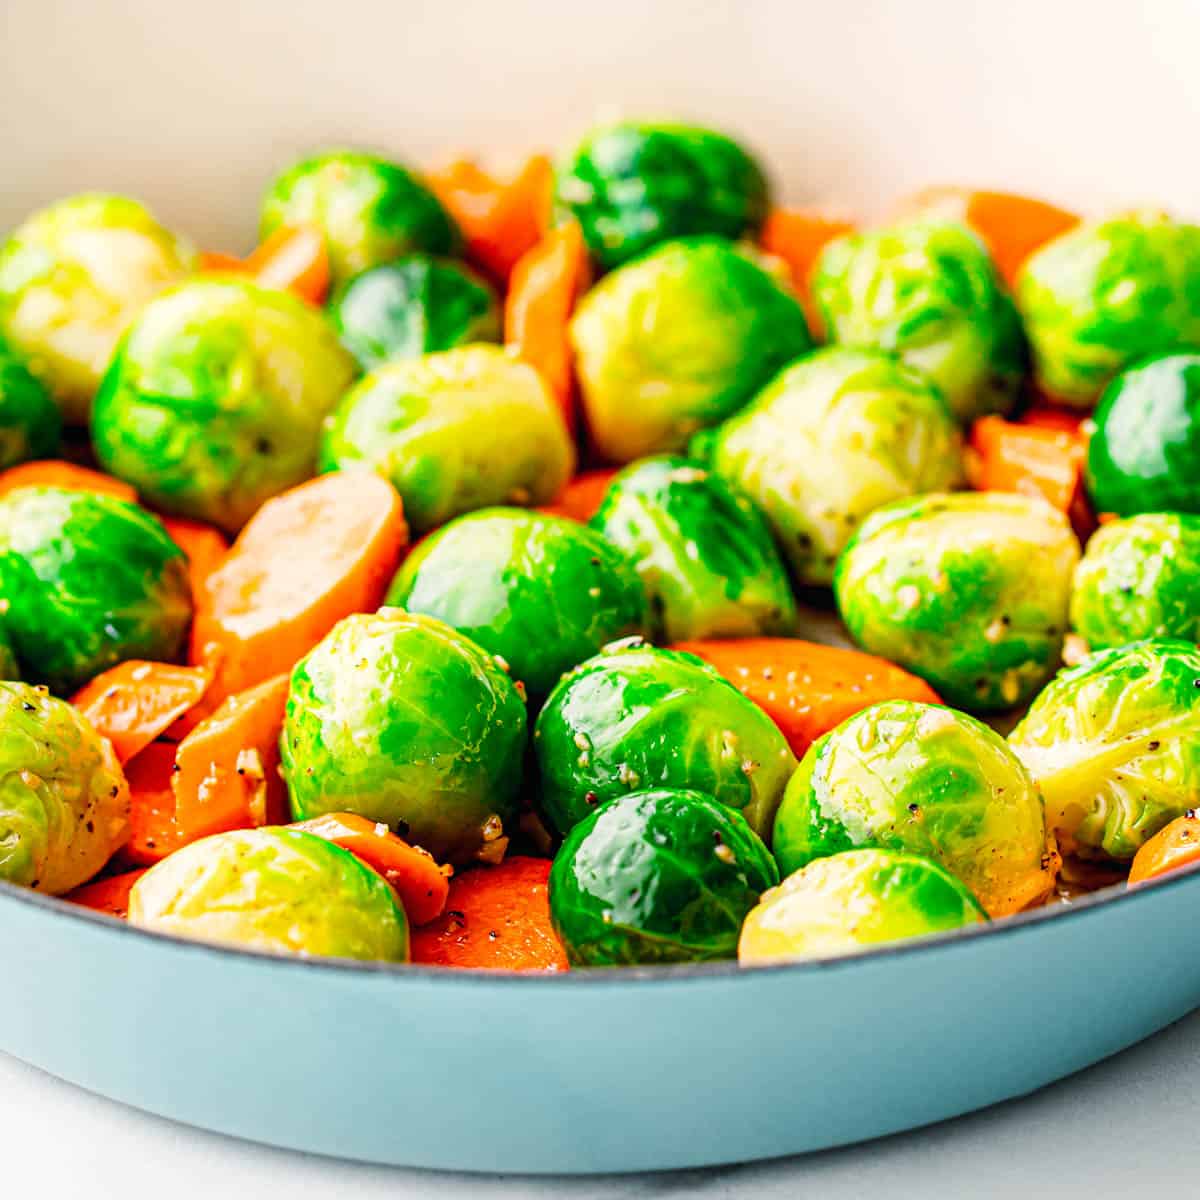 sautéed Brussels sprouts and carrots recipe